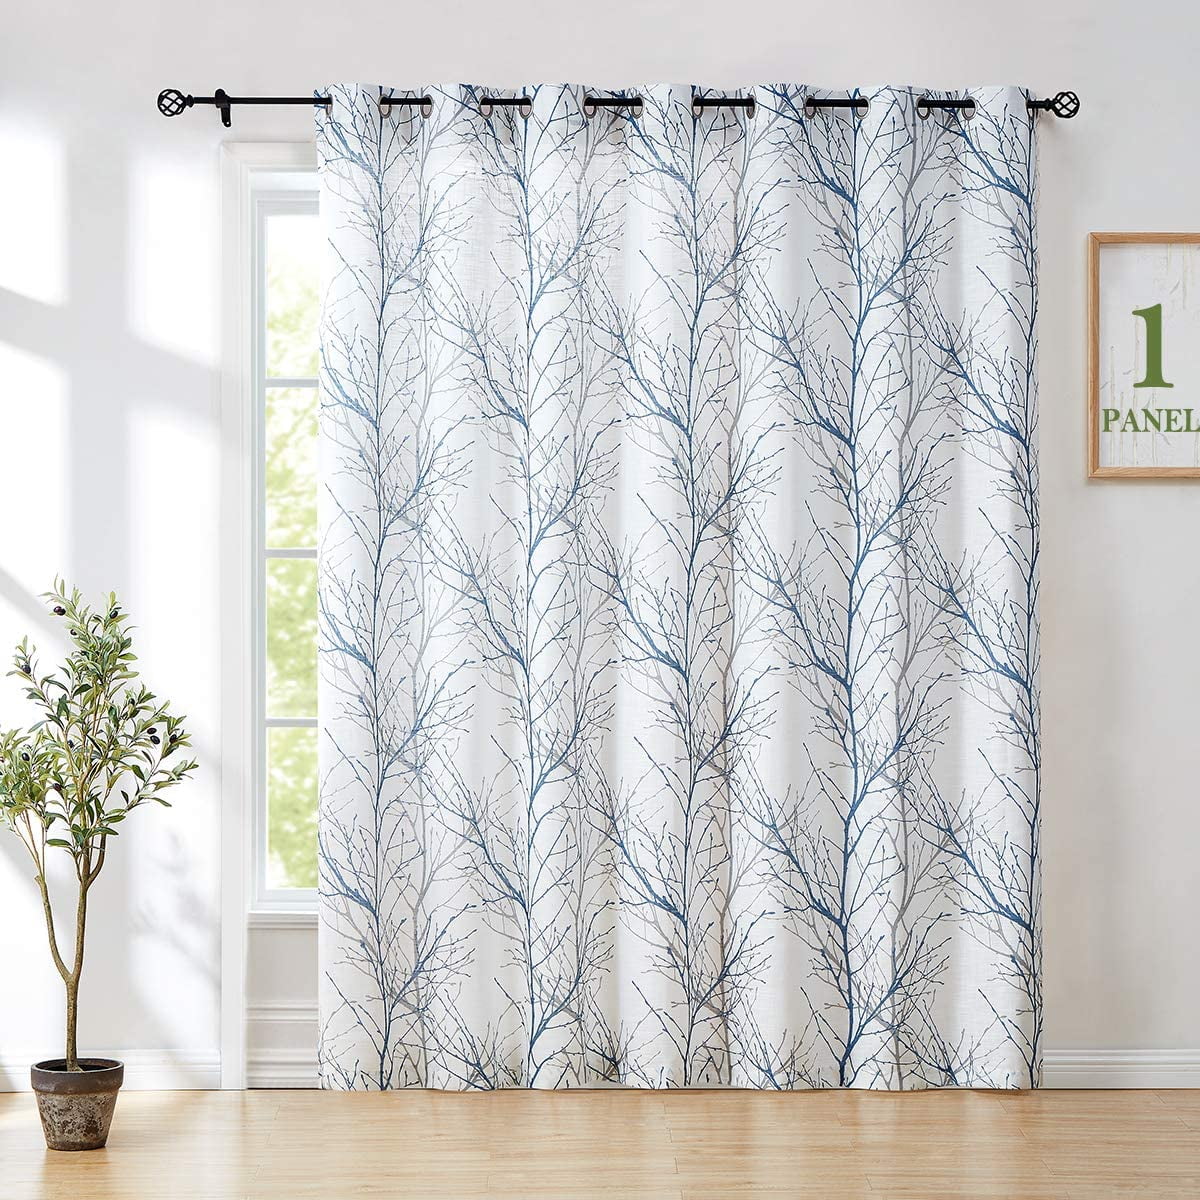 Blockout Drapes Fabric 3D Digital Printing Window Curtains Mural Boxing Pattern 